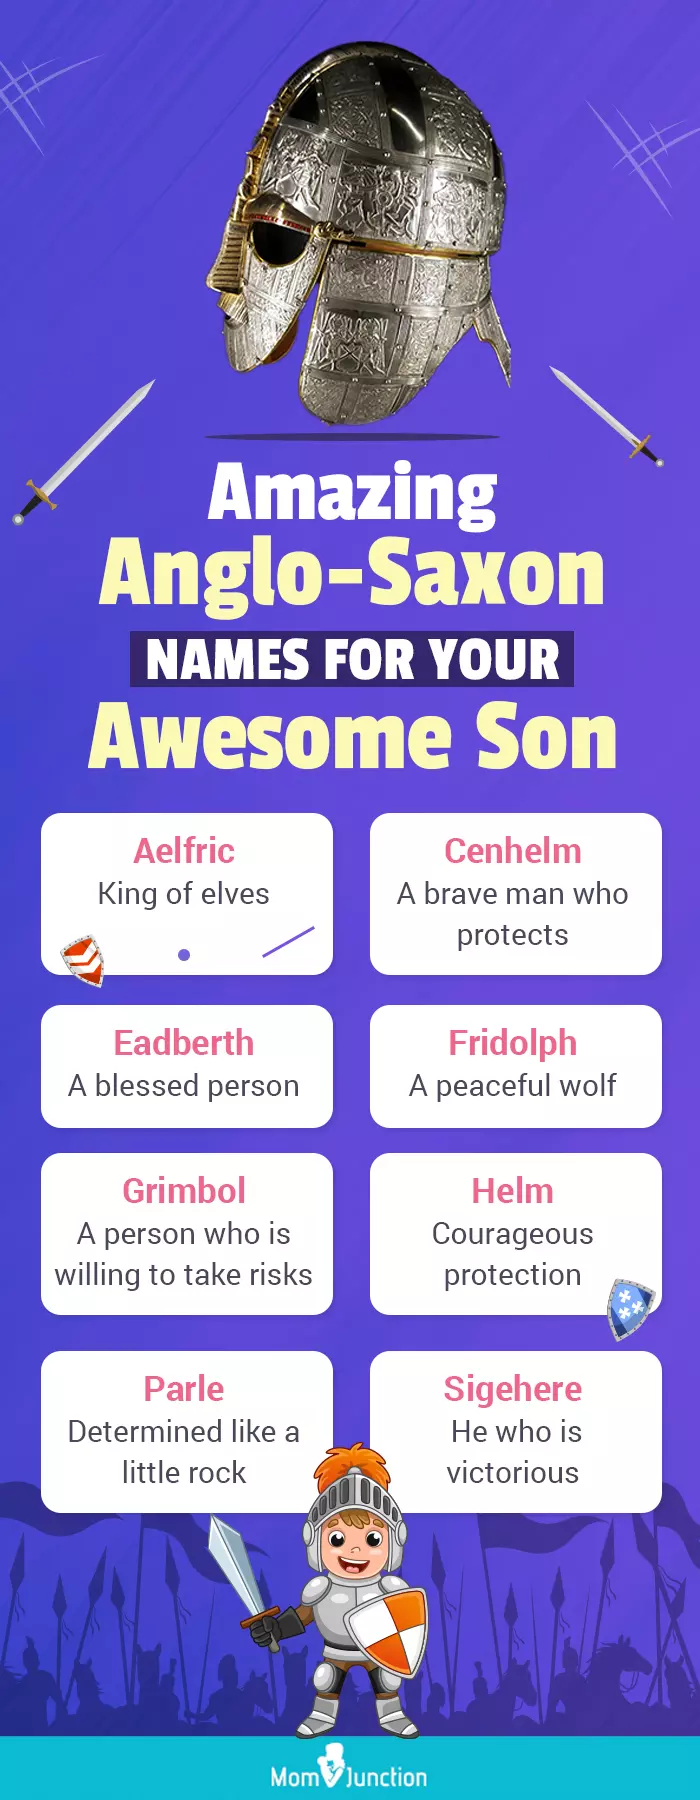 amazing anglo saxon names for your awesome son (infographic)